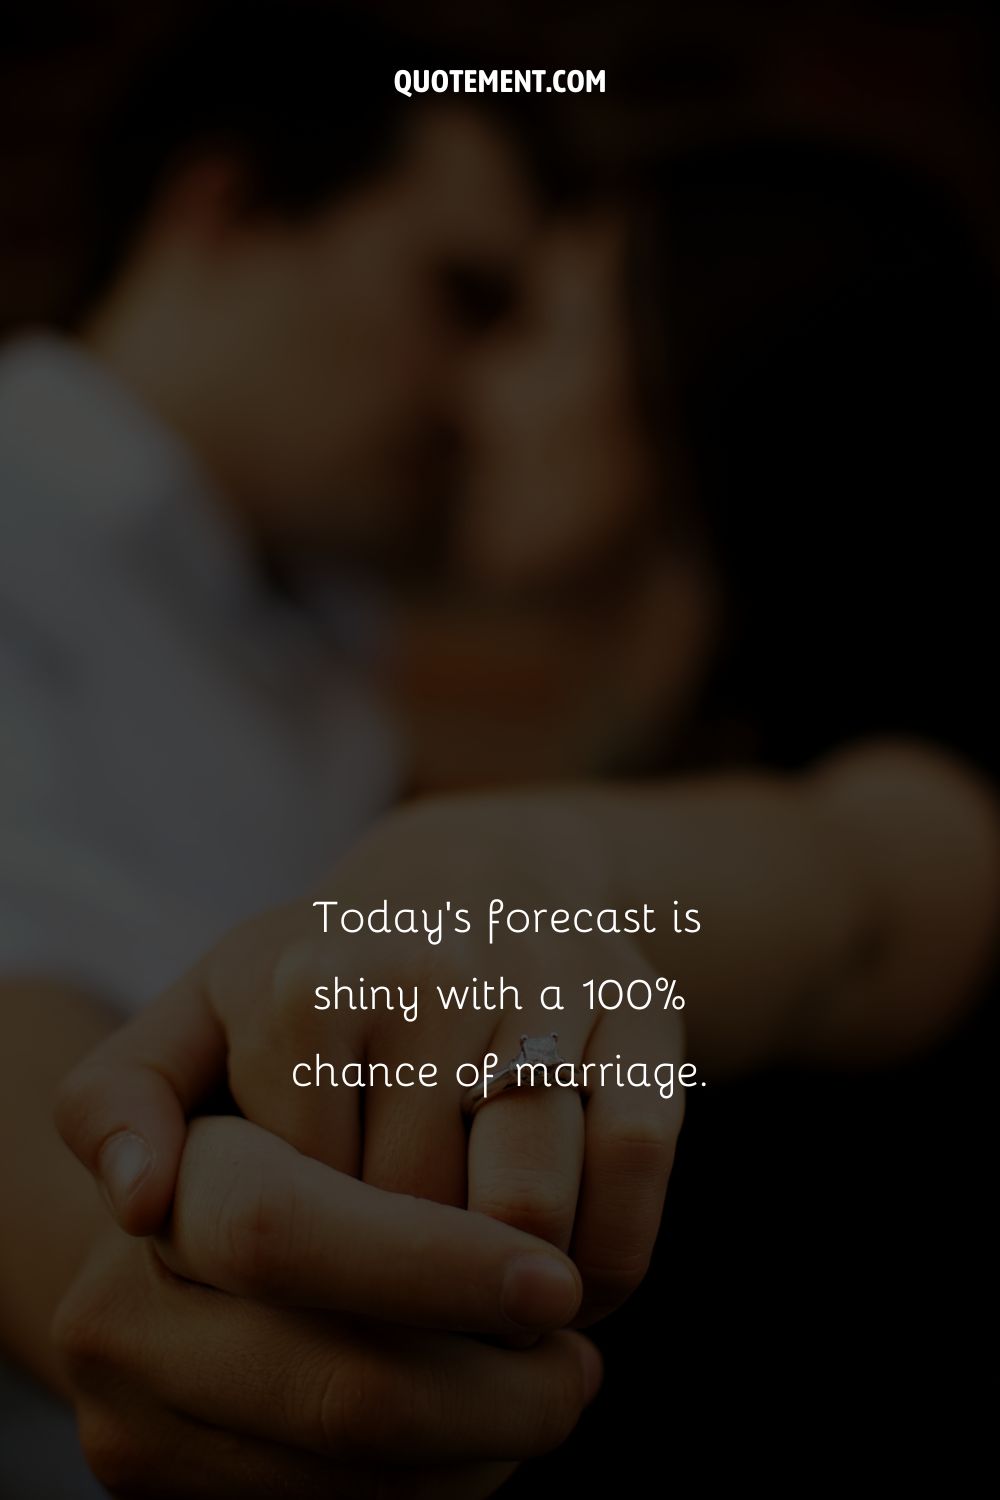 Today’s forecast is shiny with a 100% chance of marriage